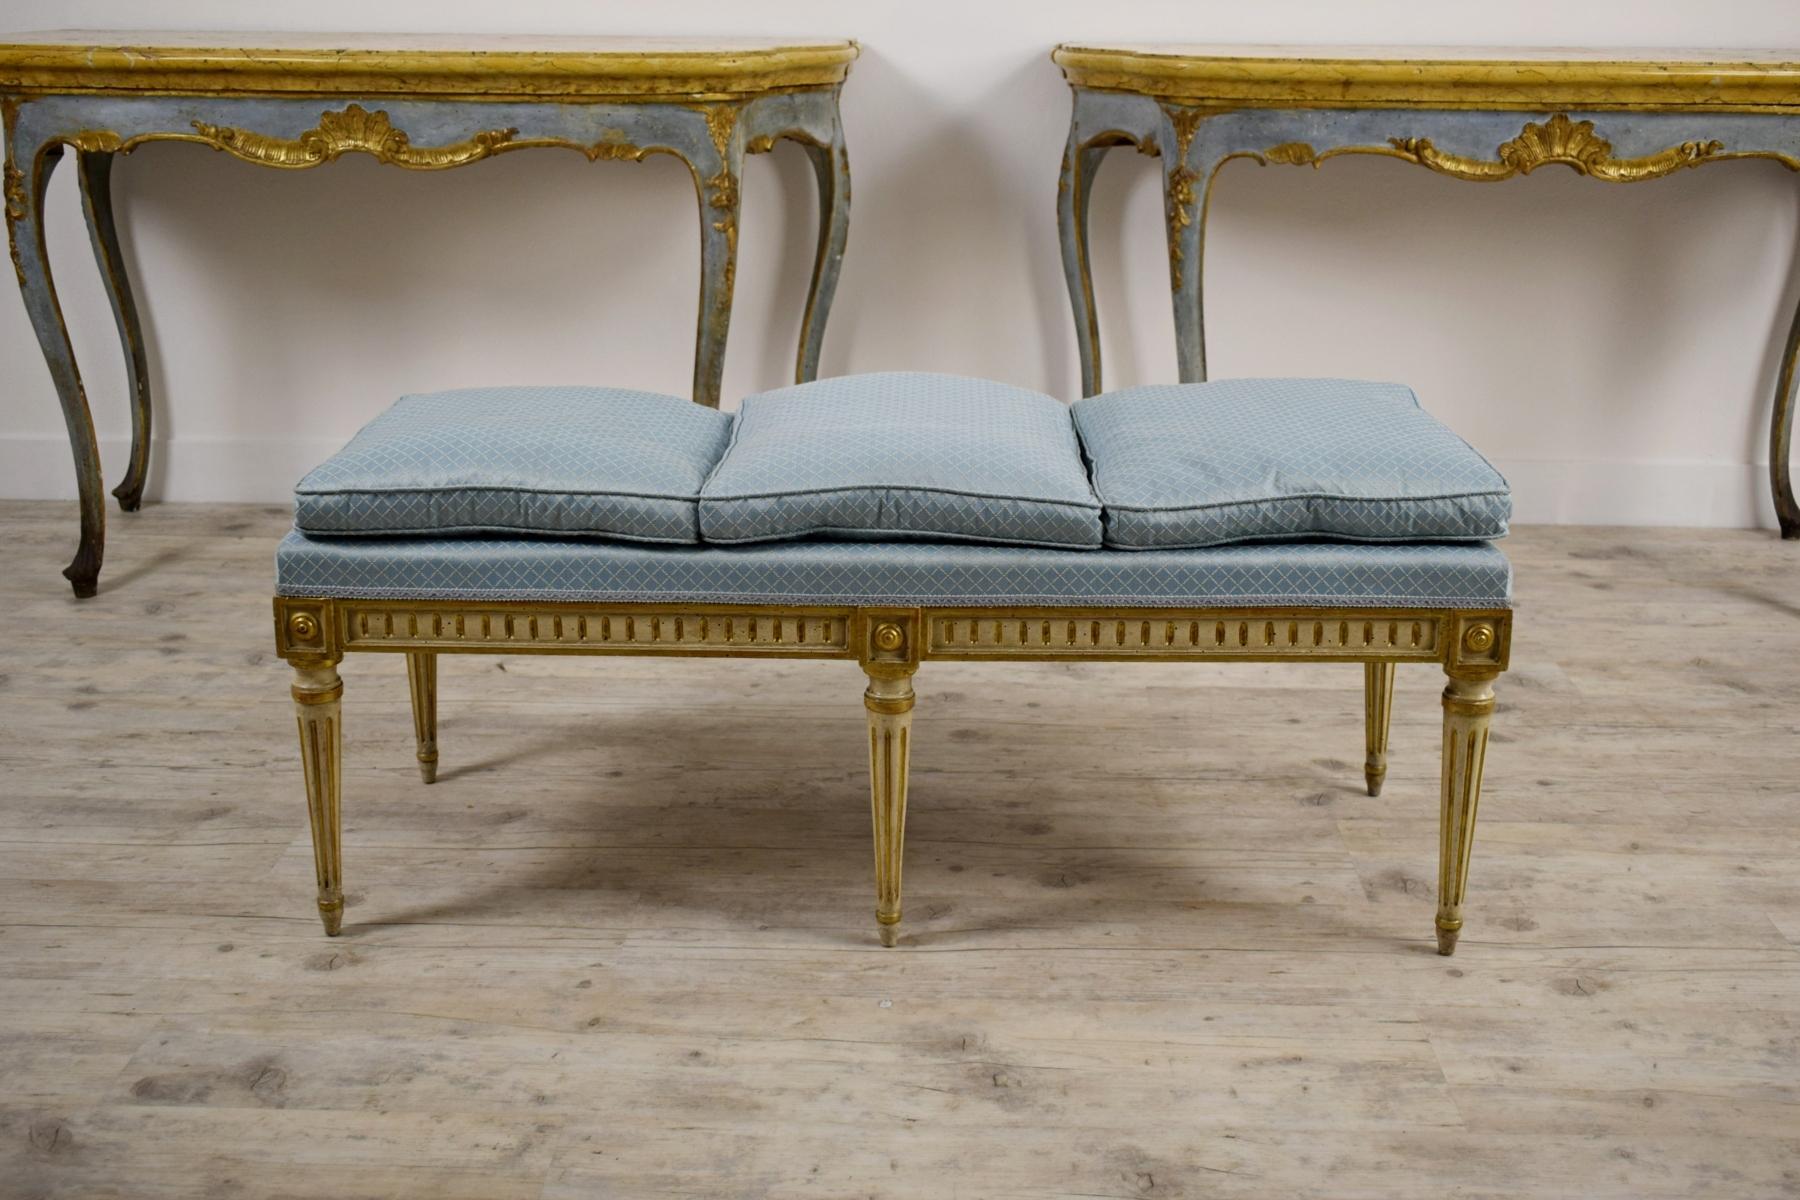 18th century, Italian neoclassical lacquered and giltwood center bench
Measures: Seat height without cushions cm 43, cushion height cm 50, width cm 120, depth cm 45

This elegant bench was made in Piedmont, in the north of Italy, in the second